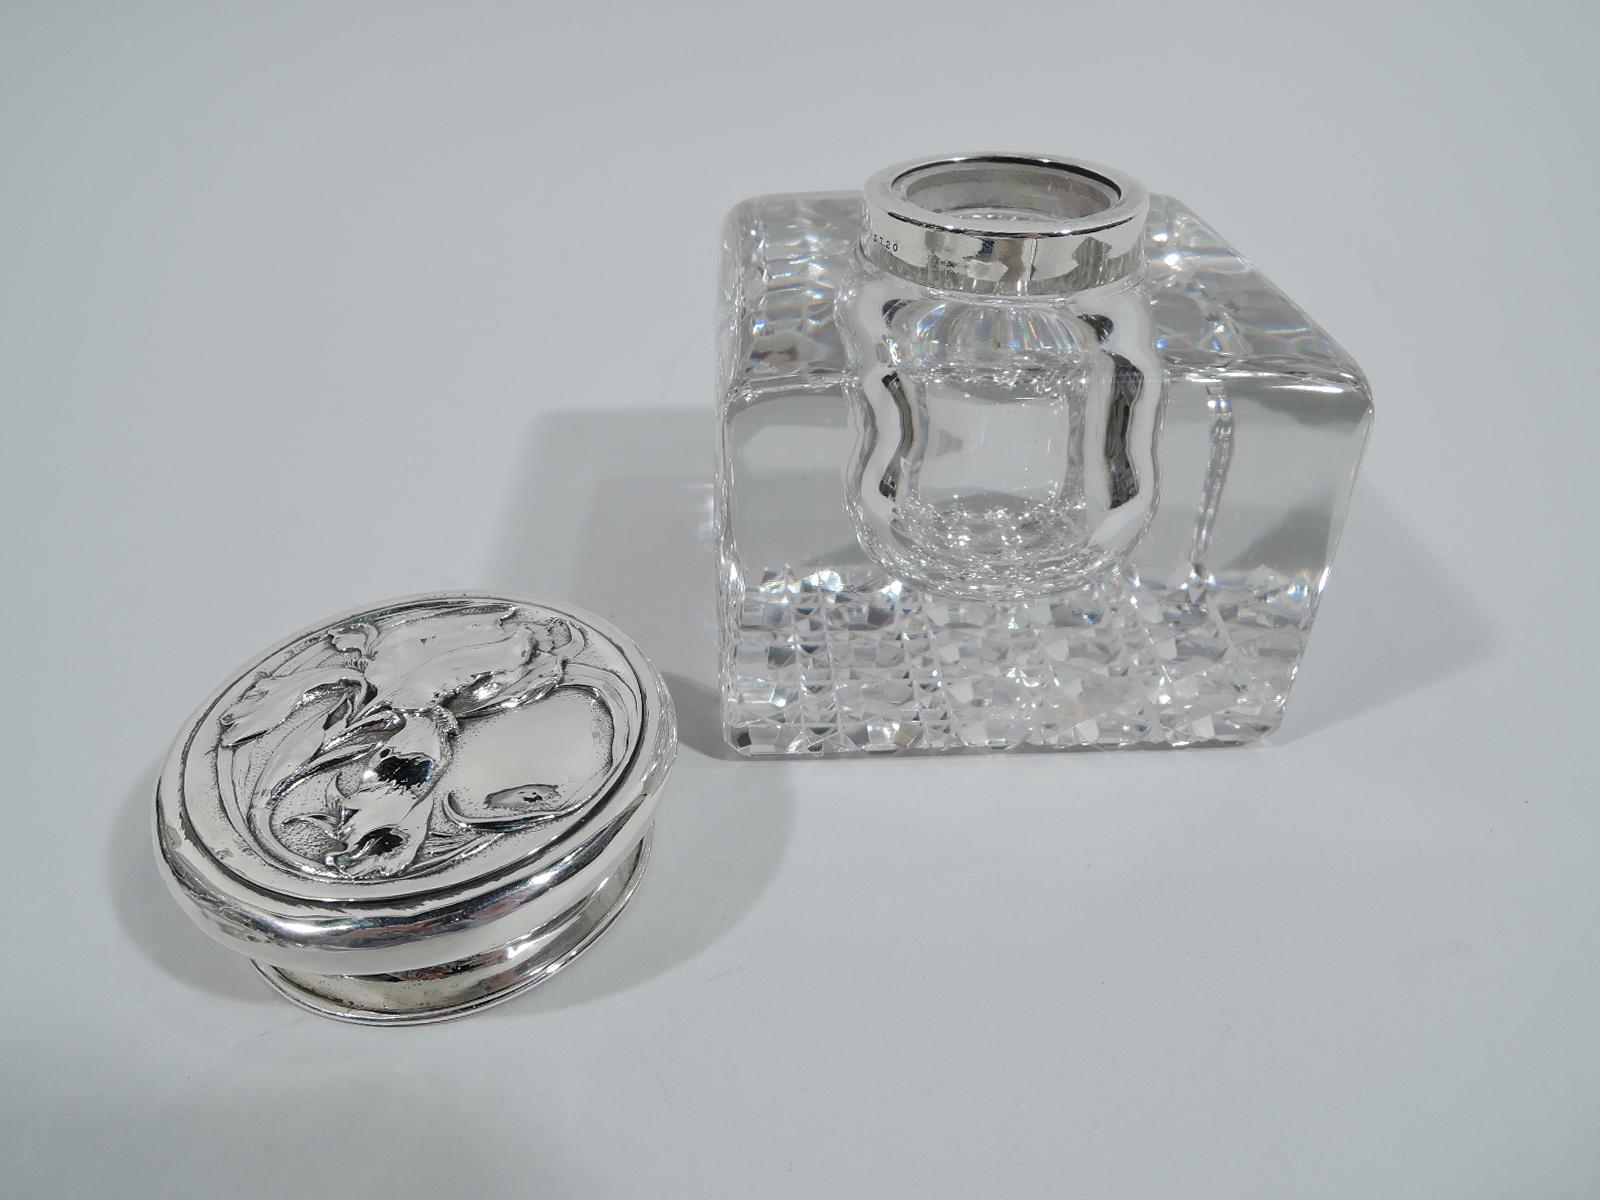 American Antique Art Nouveau Sterling Silver and Cut-Glass Inkwell by Gorham